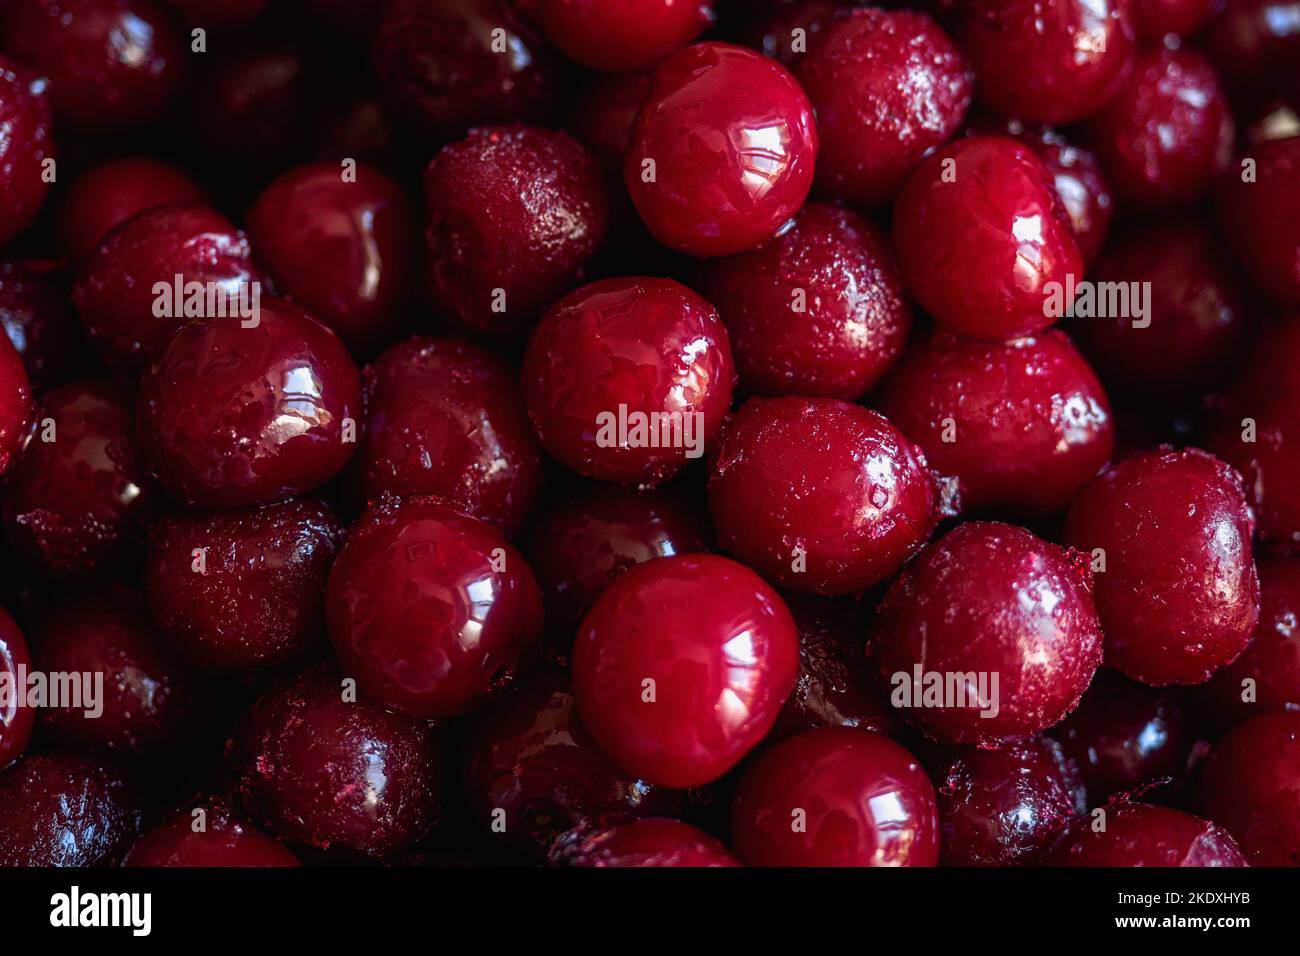 Frozen red cherry. Juicy ripe berry. View from top. Background full frame.. Stock Photo